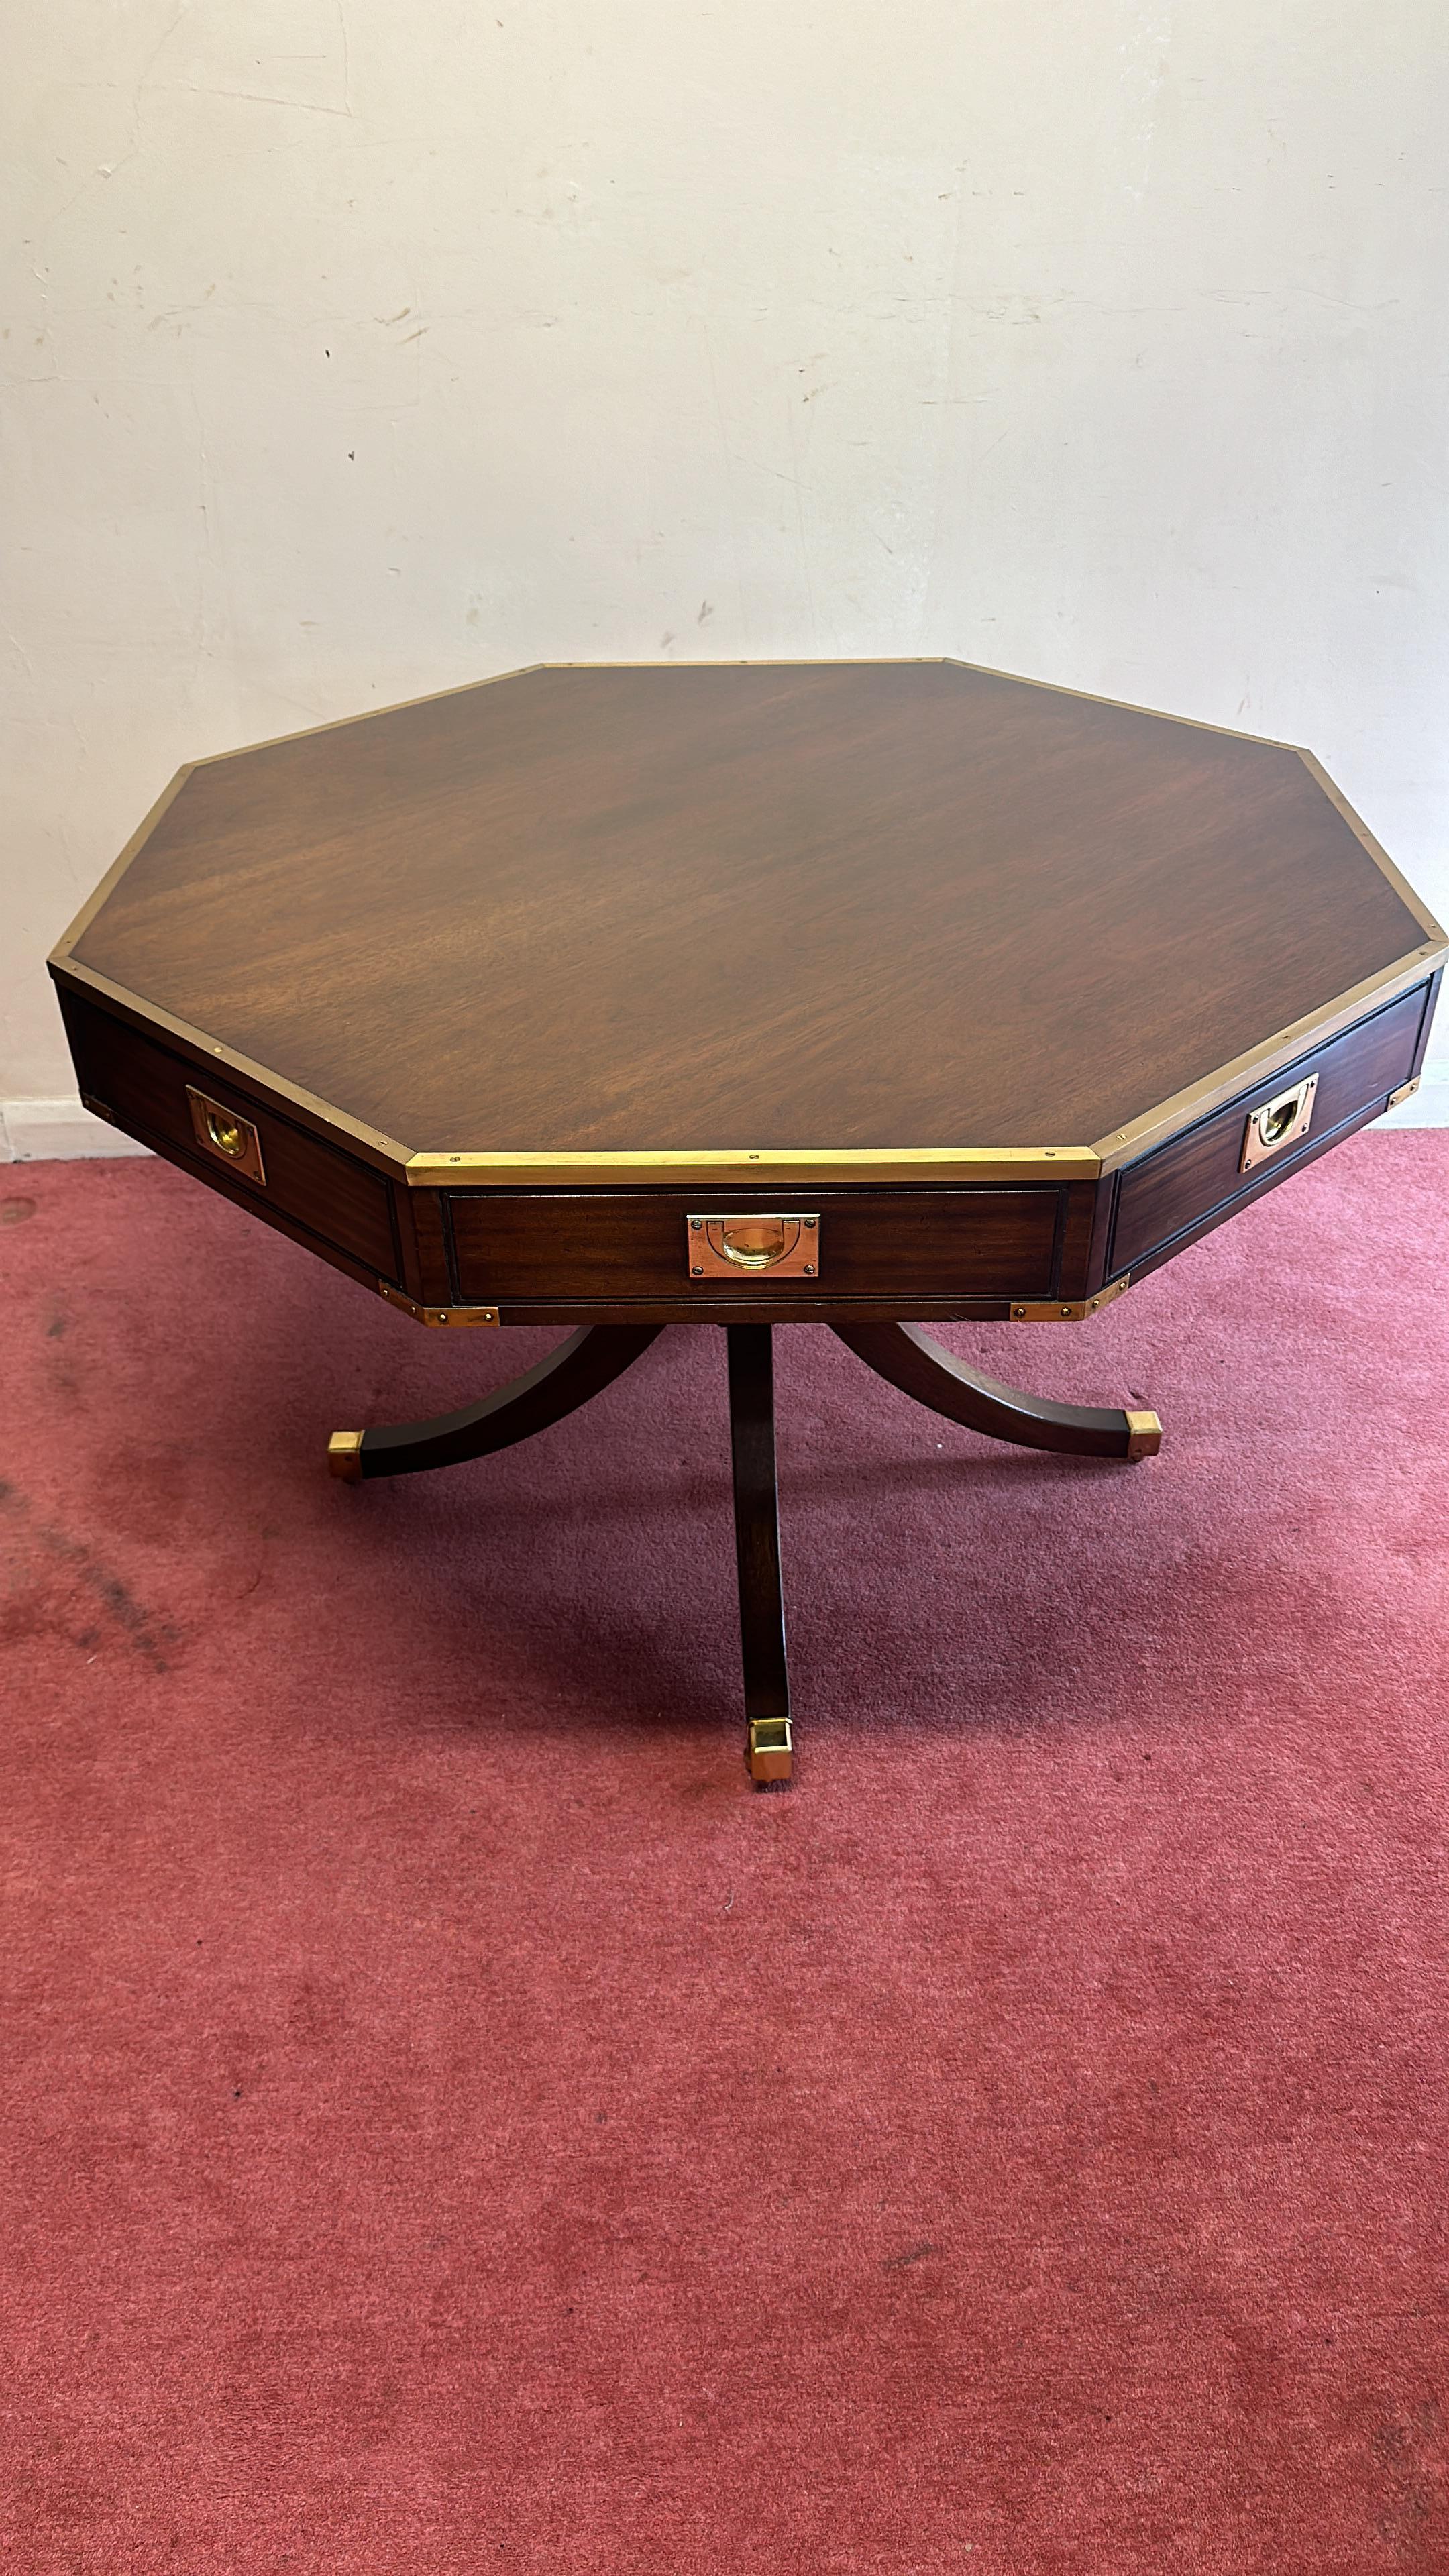 We delight to offer for sale this amazing centre table made by KENNEDY OF IPSWICH retailed by Harrods London . Made by MAHOGANY AND BRASS , the octagonal top fitted with four real and four false drawers, brass military recessed handles, raised on a